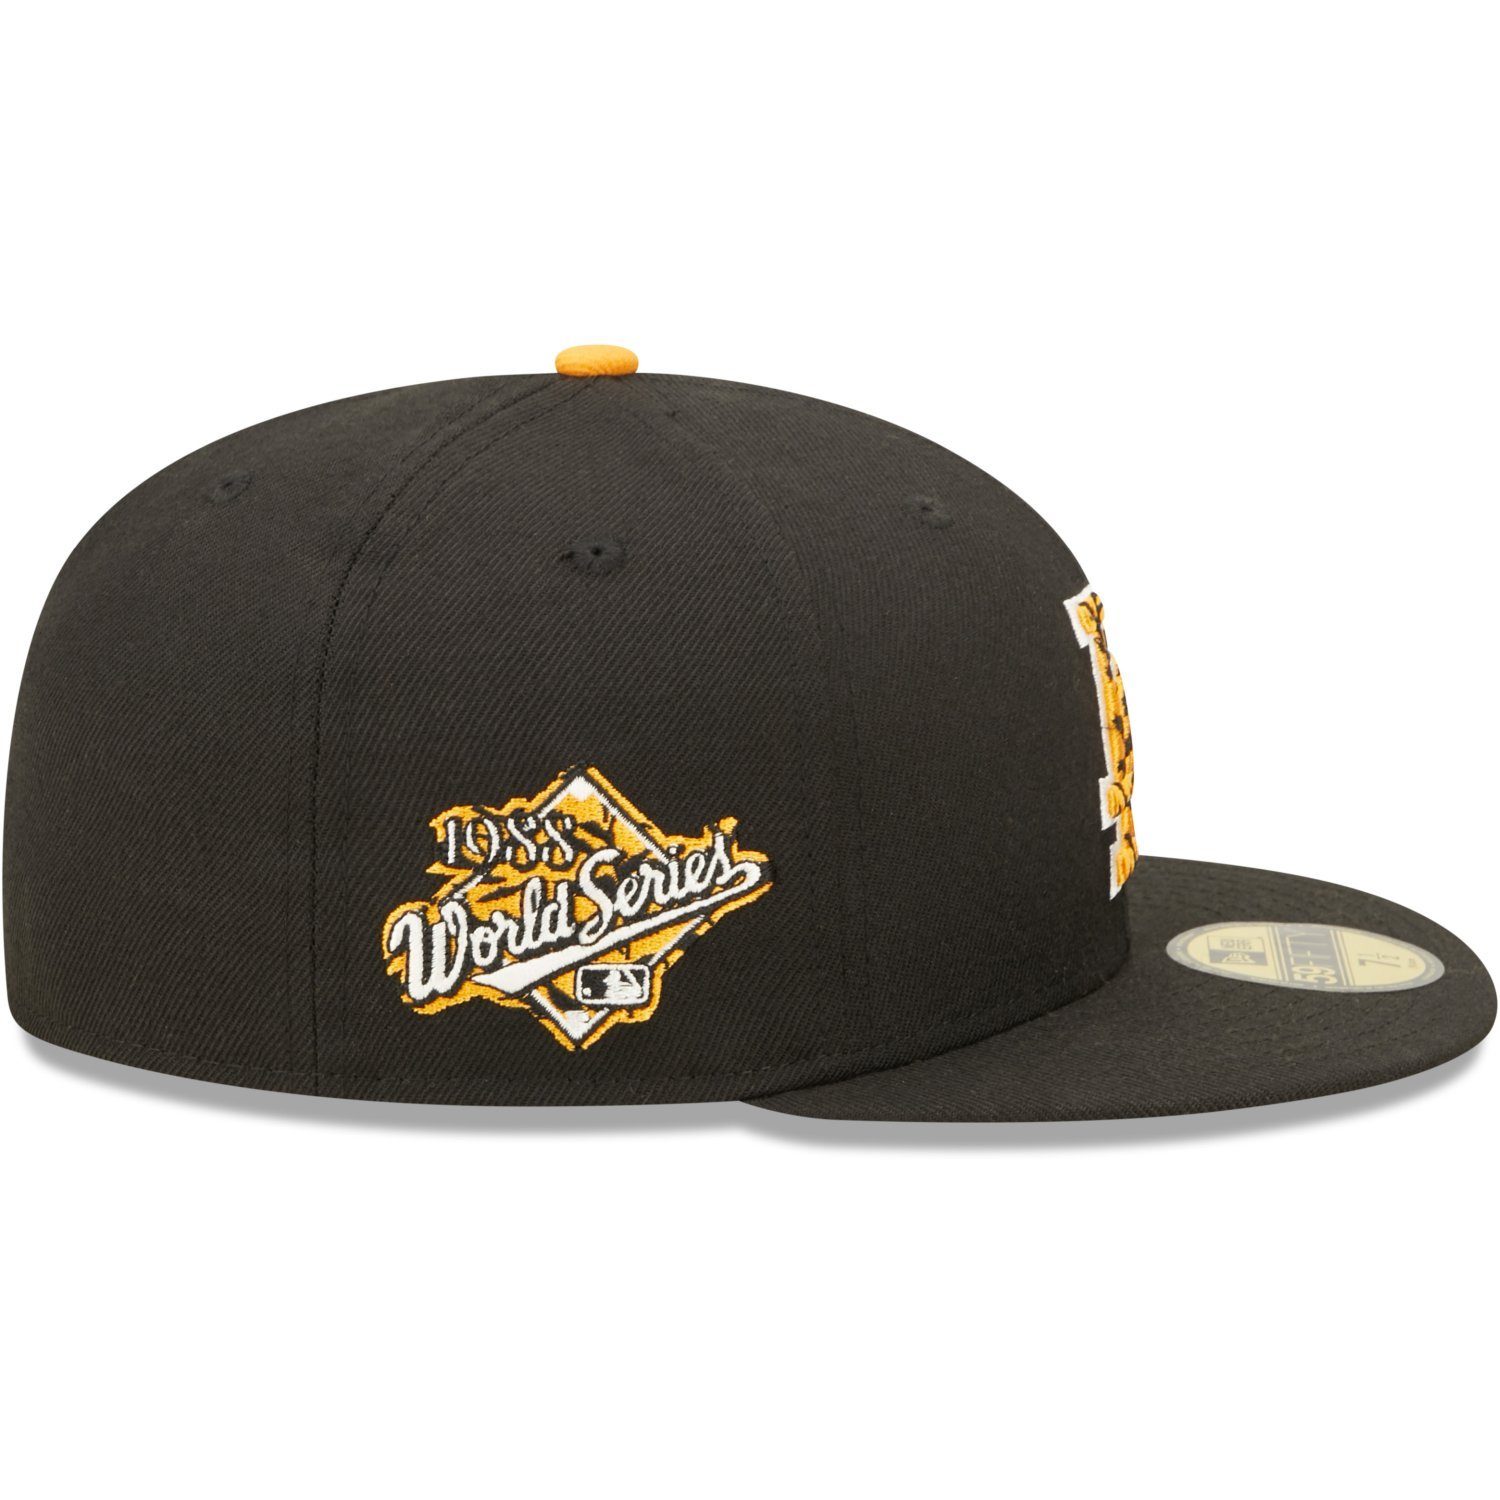 Cap Los Era Angeles TIGERFILL 59Fifty New Dodgers Fitted